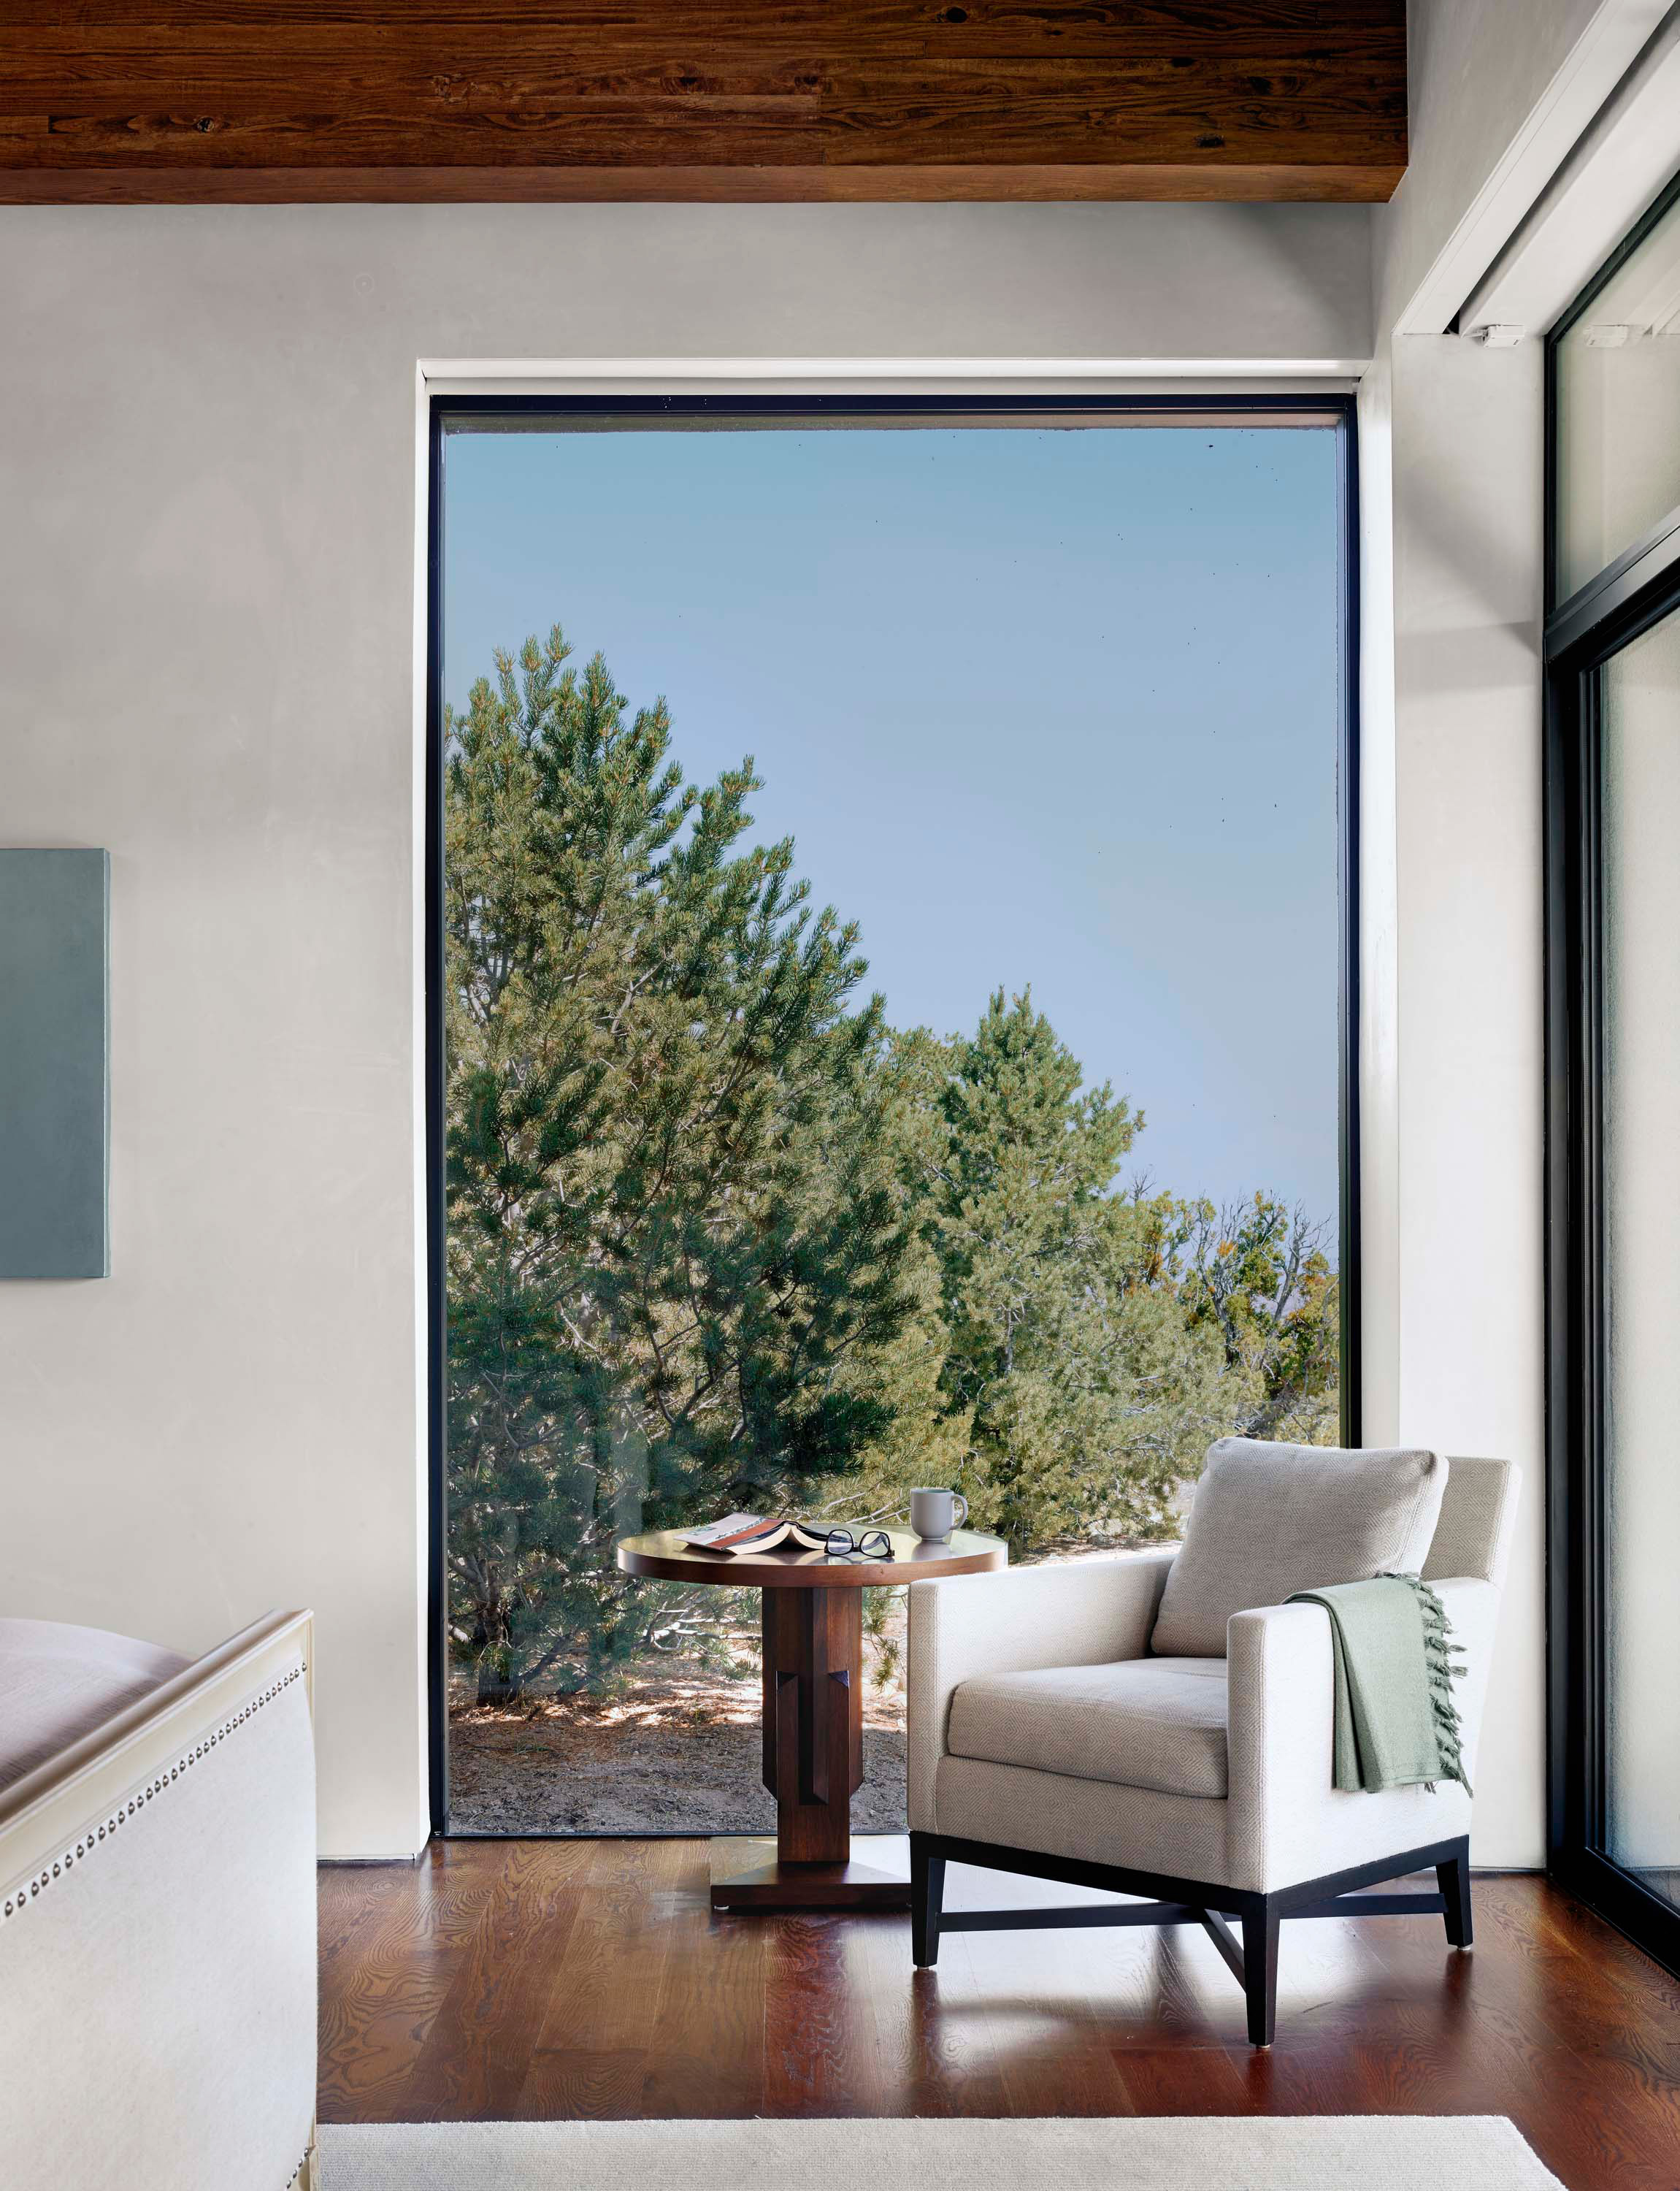 Interior photo of the Sangre de Cristo House by Specht Novak Architects. Shot by Casey Dunn, featuring a bright lounging area of a bedroom with a glass wall and views of surrounding greenery.